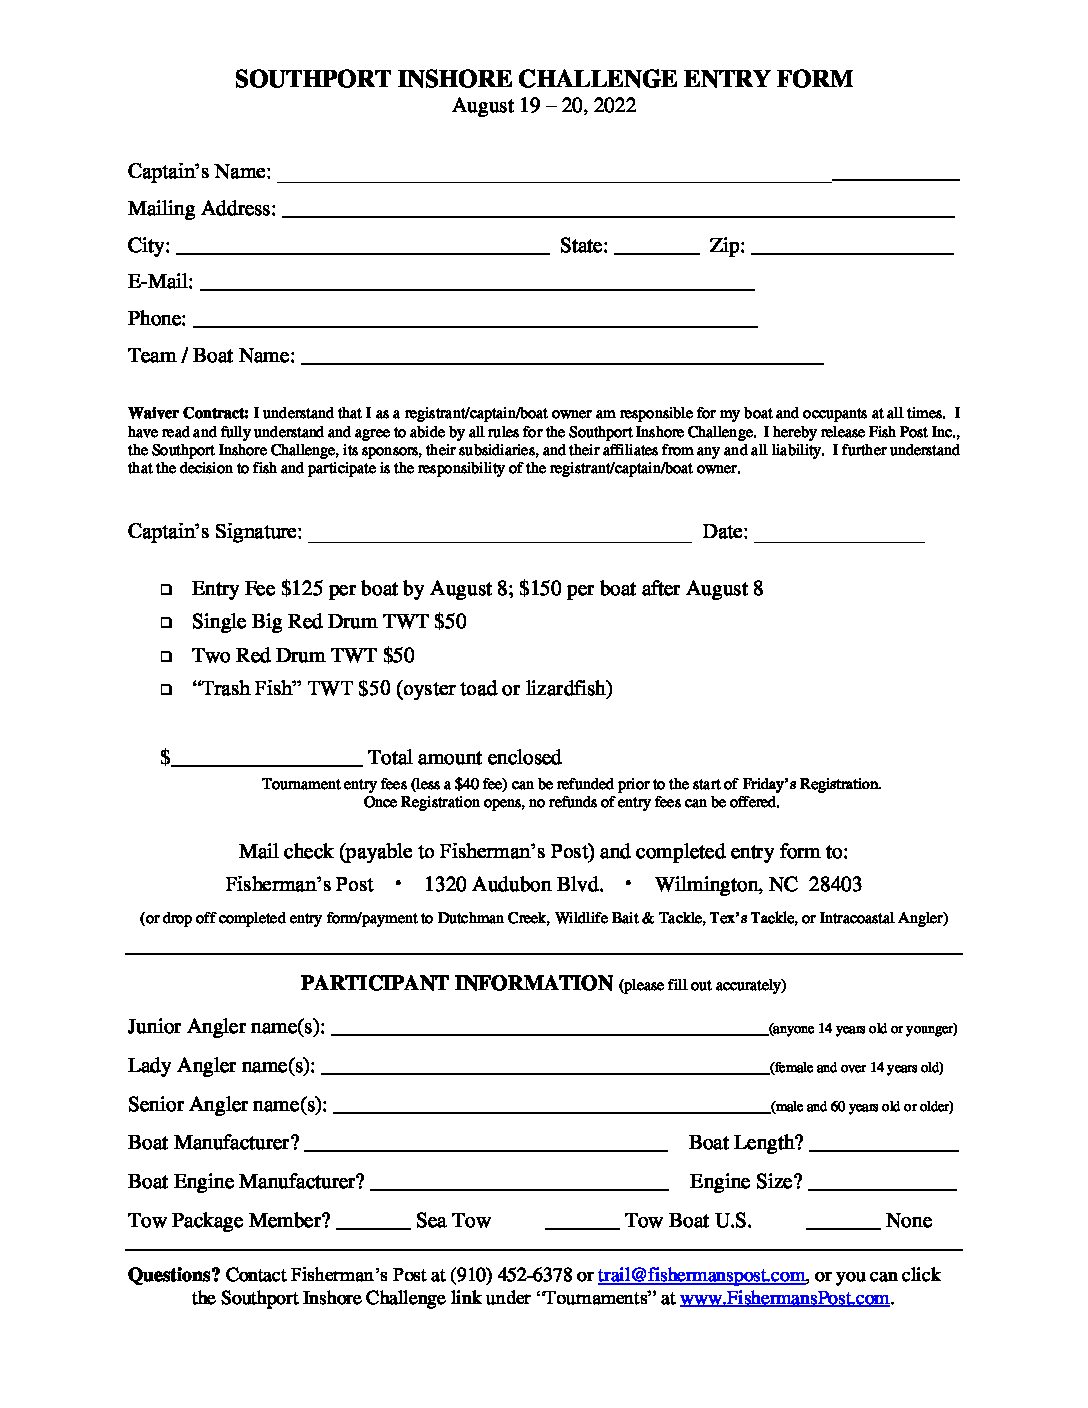 2022 Southport Inshore Challenge Print Entry Form